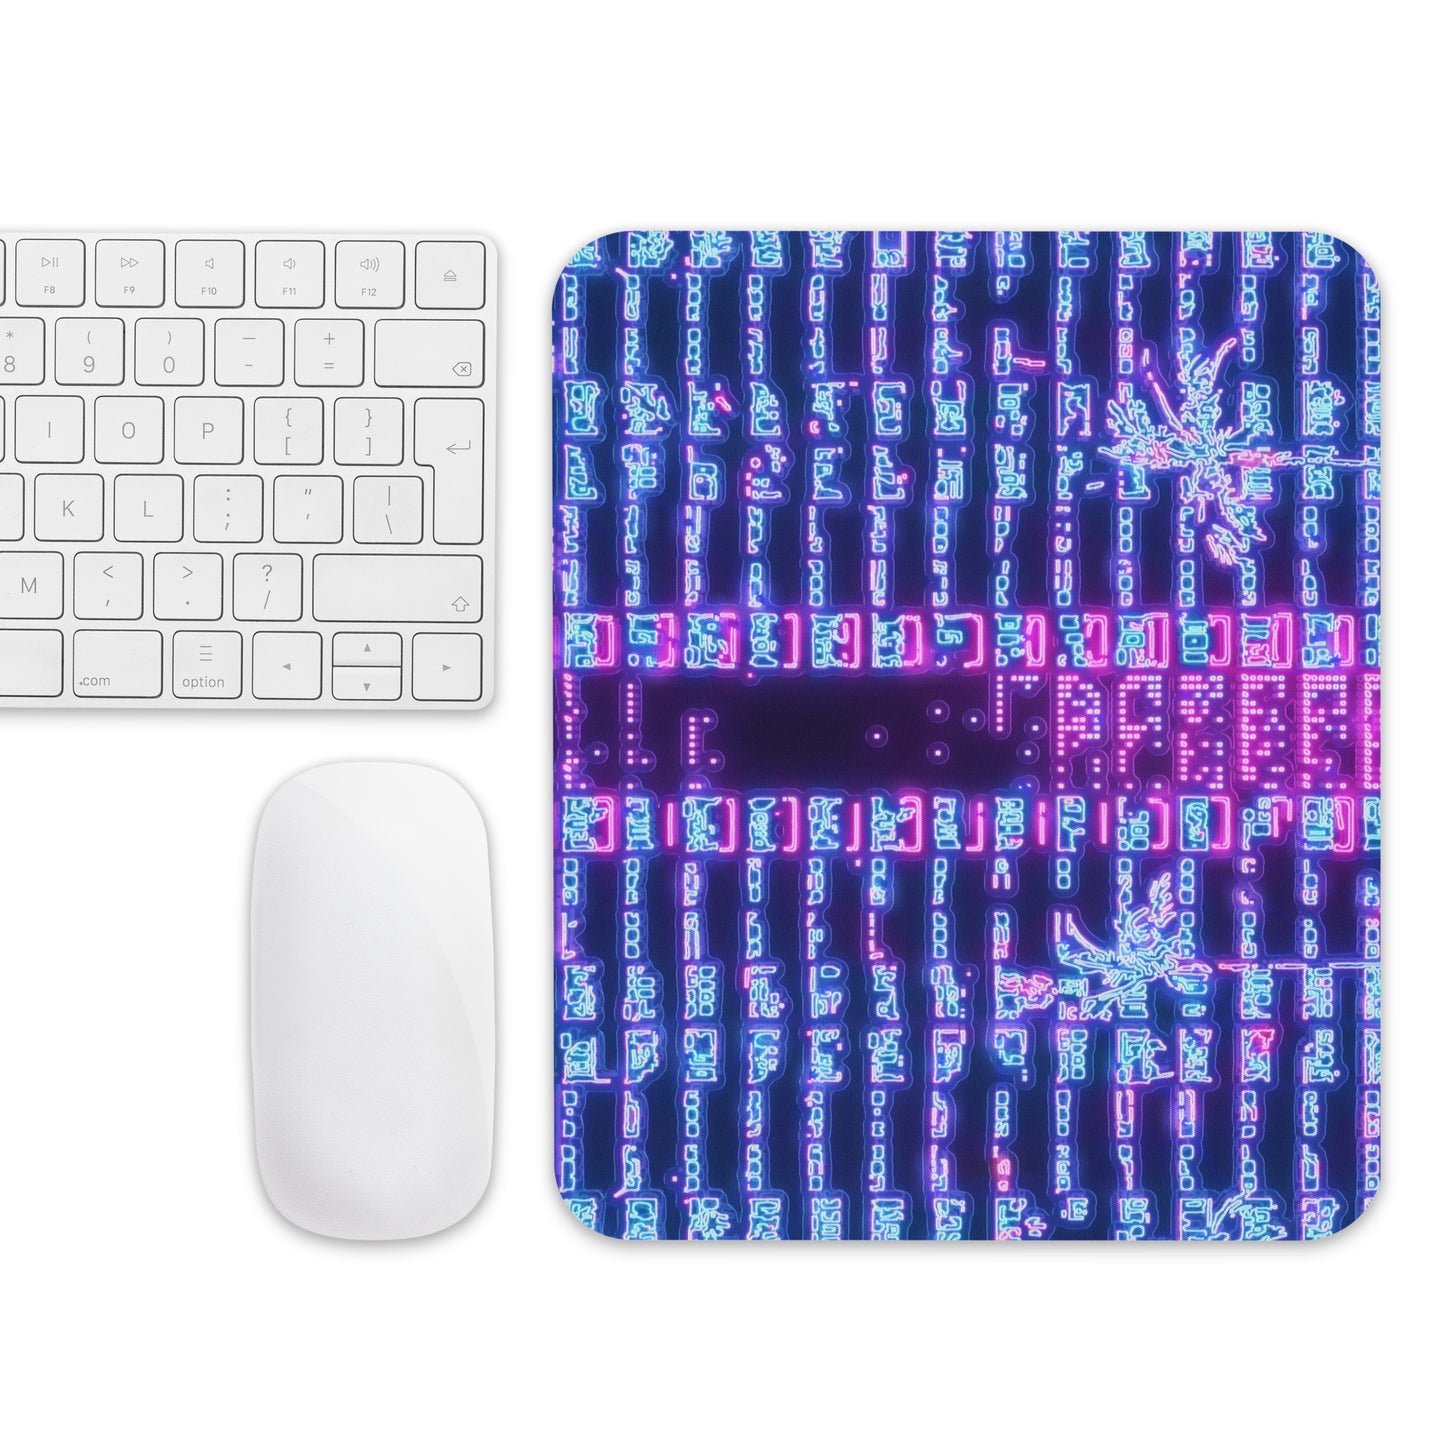 Neon Choi Hung Village Mouse Pad